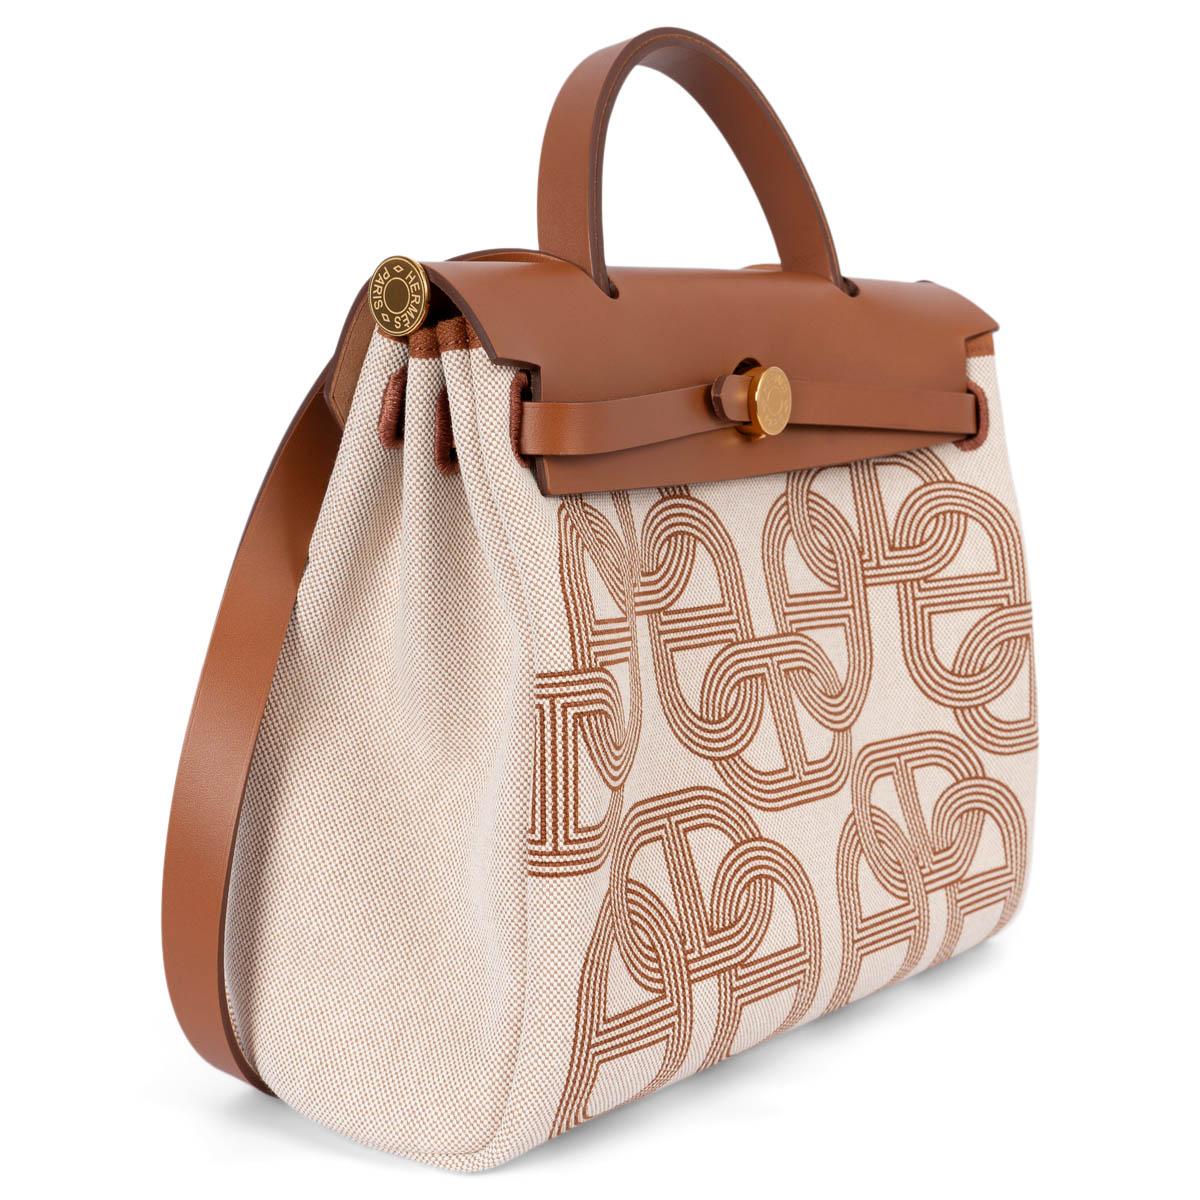 100% authentic Hermès Cicuit 24 Herbag Zip 31 Retourne shoulder bag in Ecru-Beige (oatmeal) Toile H Plum canvas with Fauve (cognac) print and details in Fauve (cognac) Vache Hunter leather. Exterior zip pocket on the back. Closes with two straps on